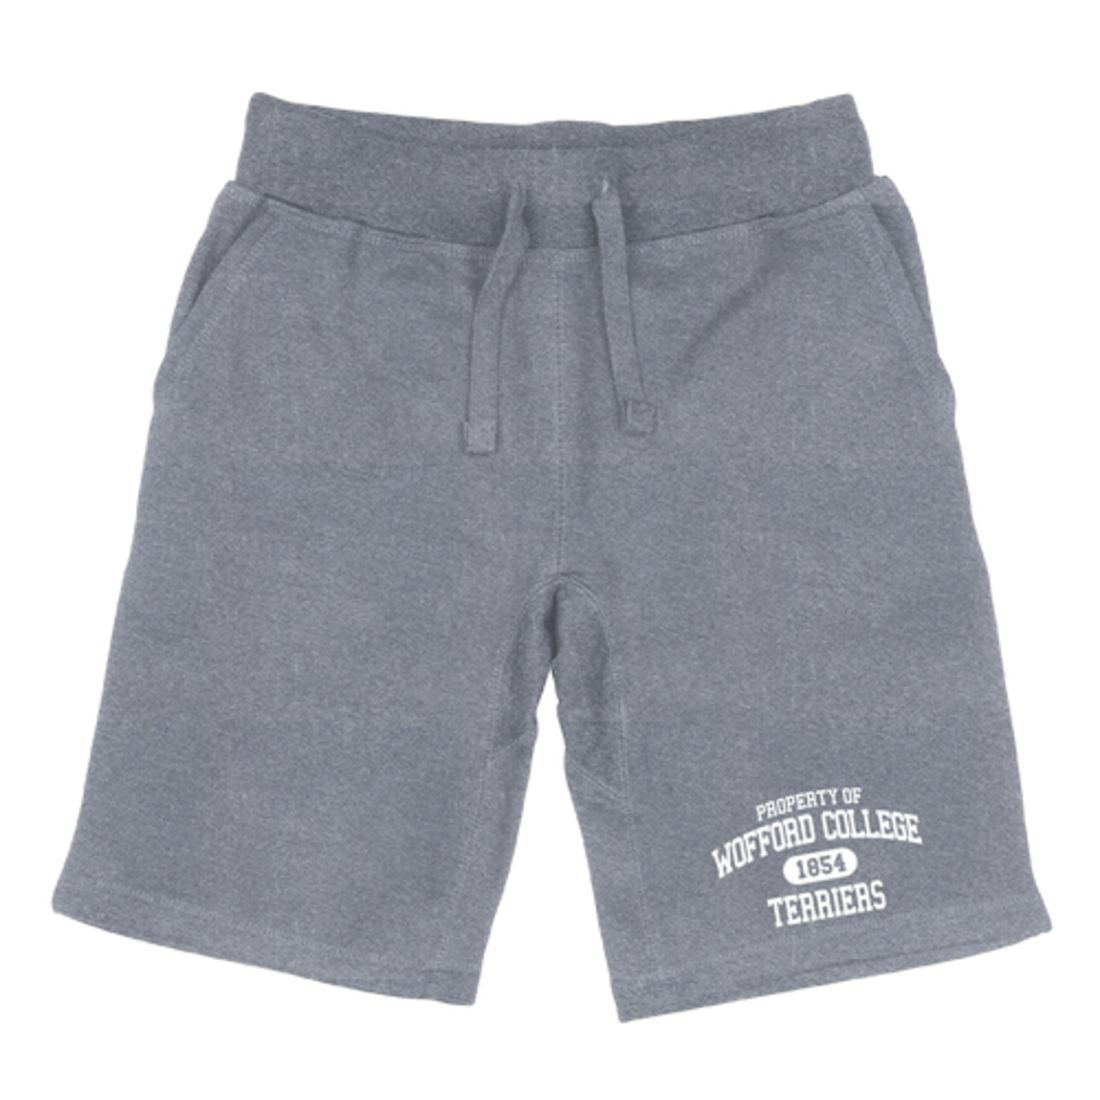 Wofford College Terriers Property Fleece Drawstring Shorts-Campus-Wardrobe